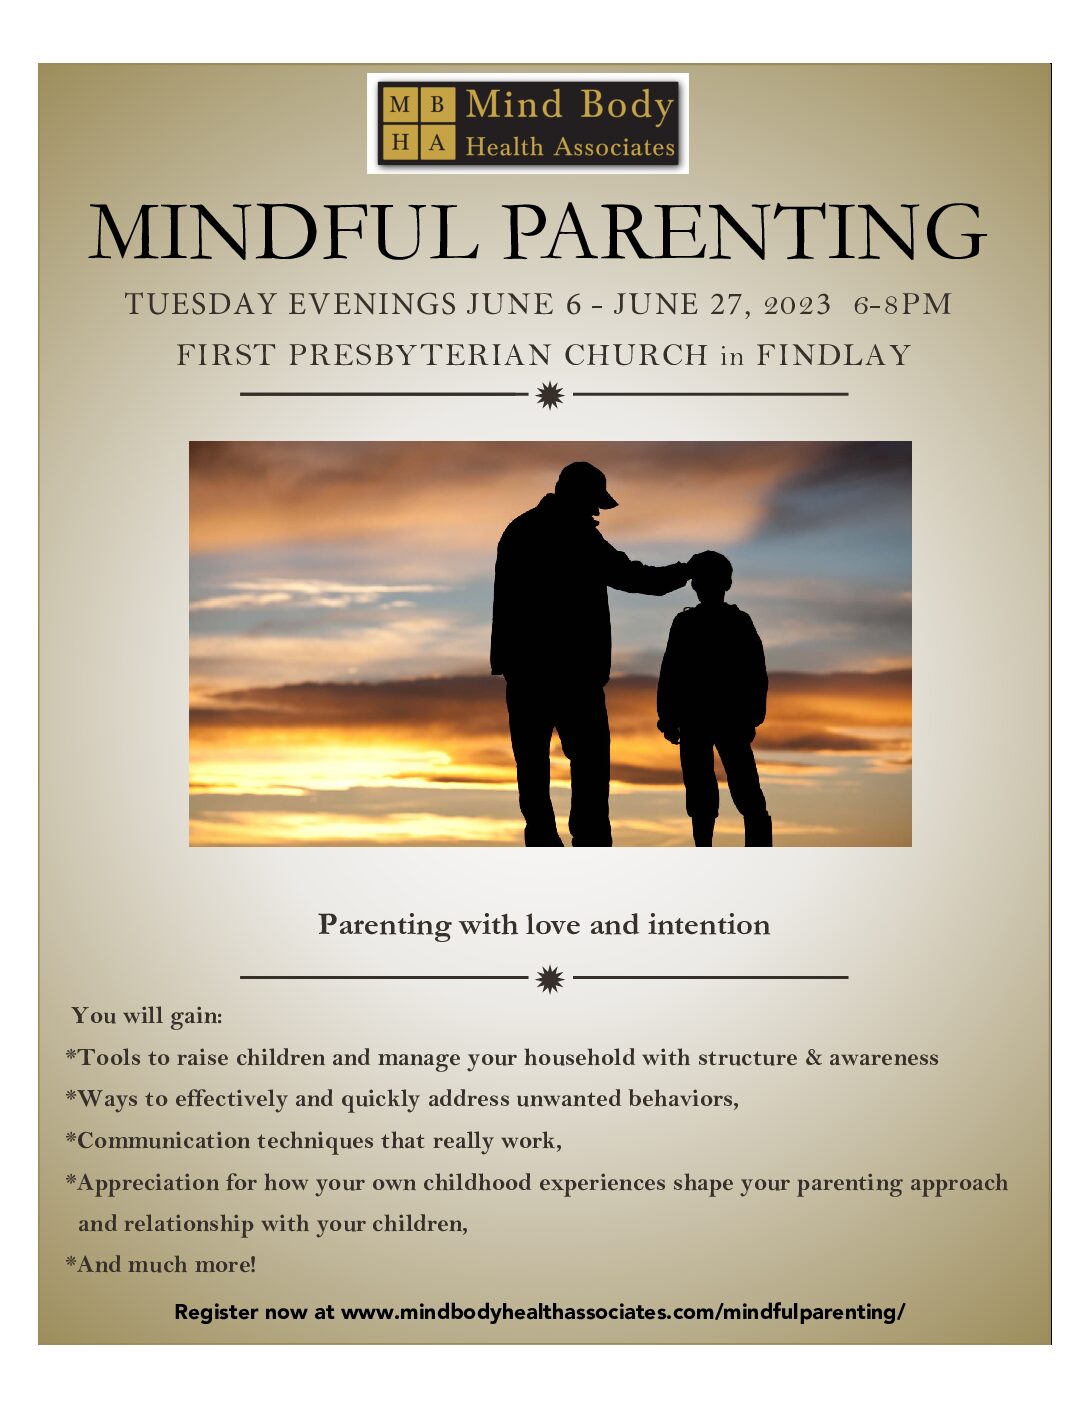 Mindful Parenting Class 2022 Information